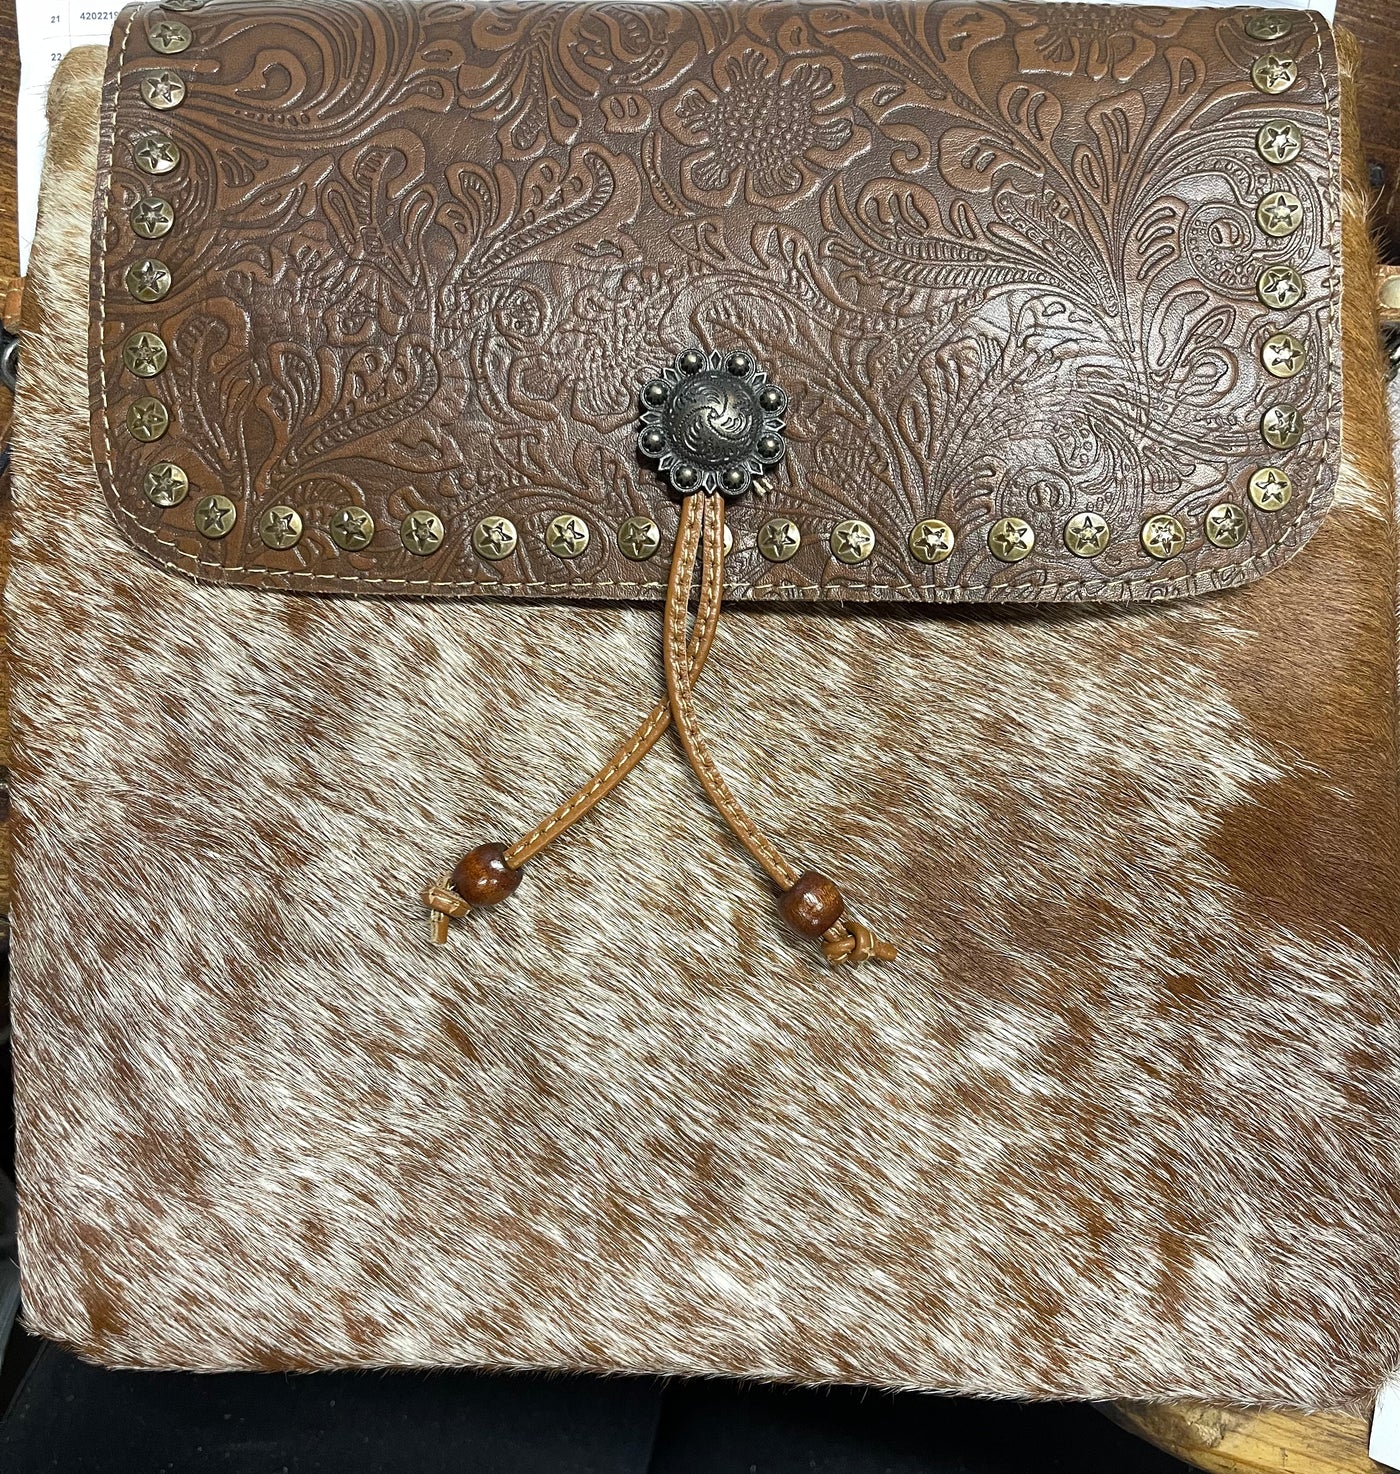 Myra Beautious Leather cowhide bag *